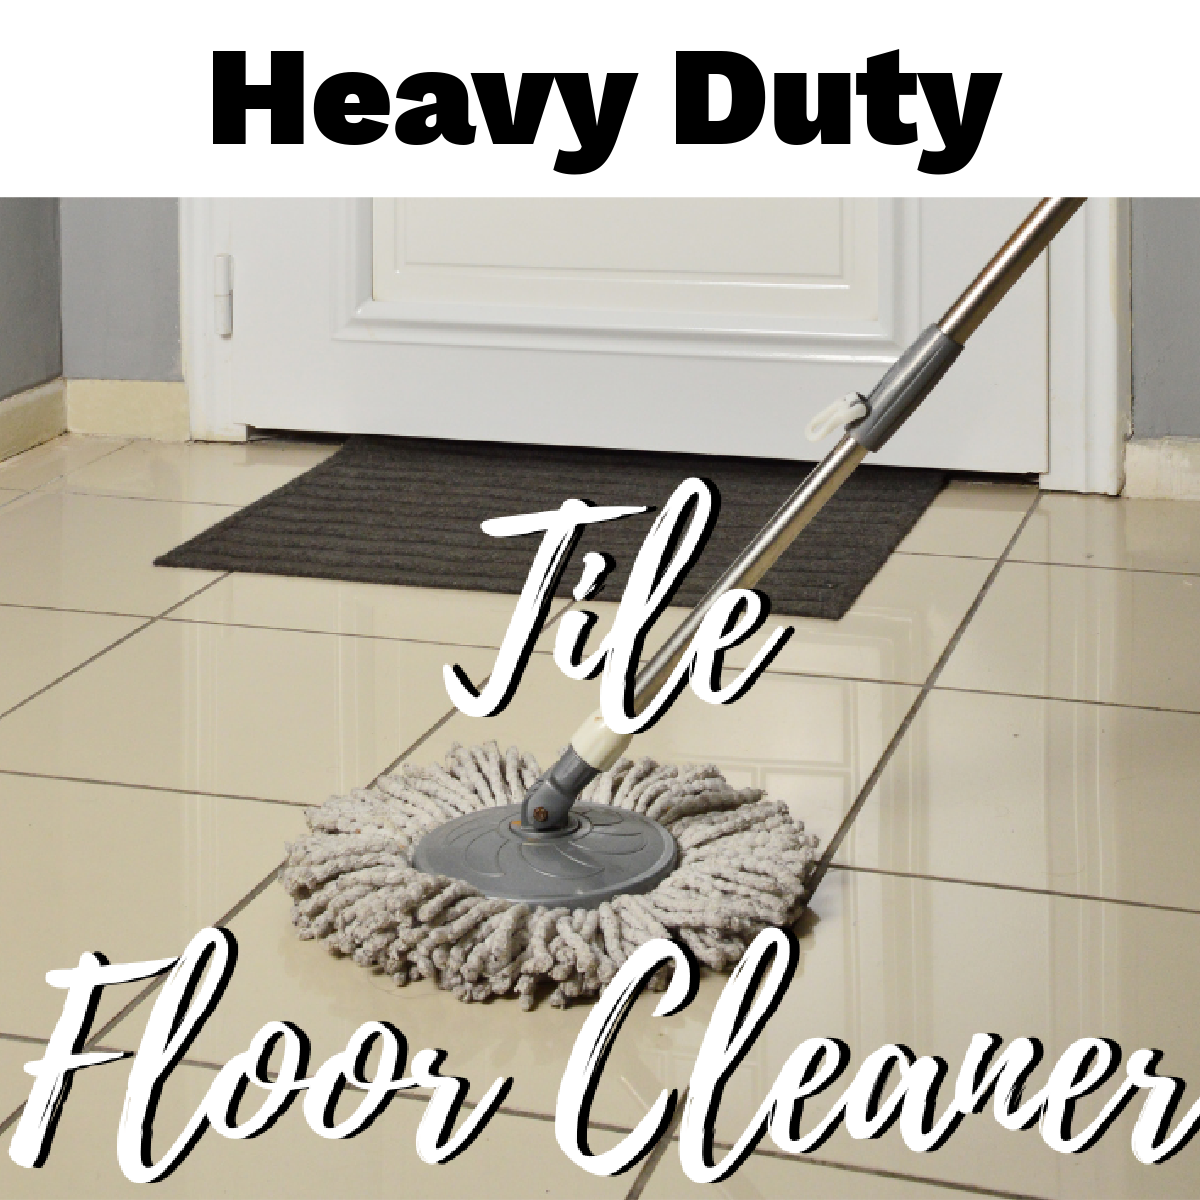 Tile Floor Cleaner: heavy duty cleaning solution - Simple and Seasonal